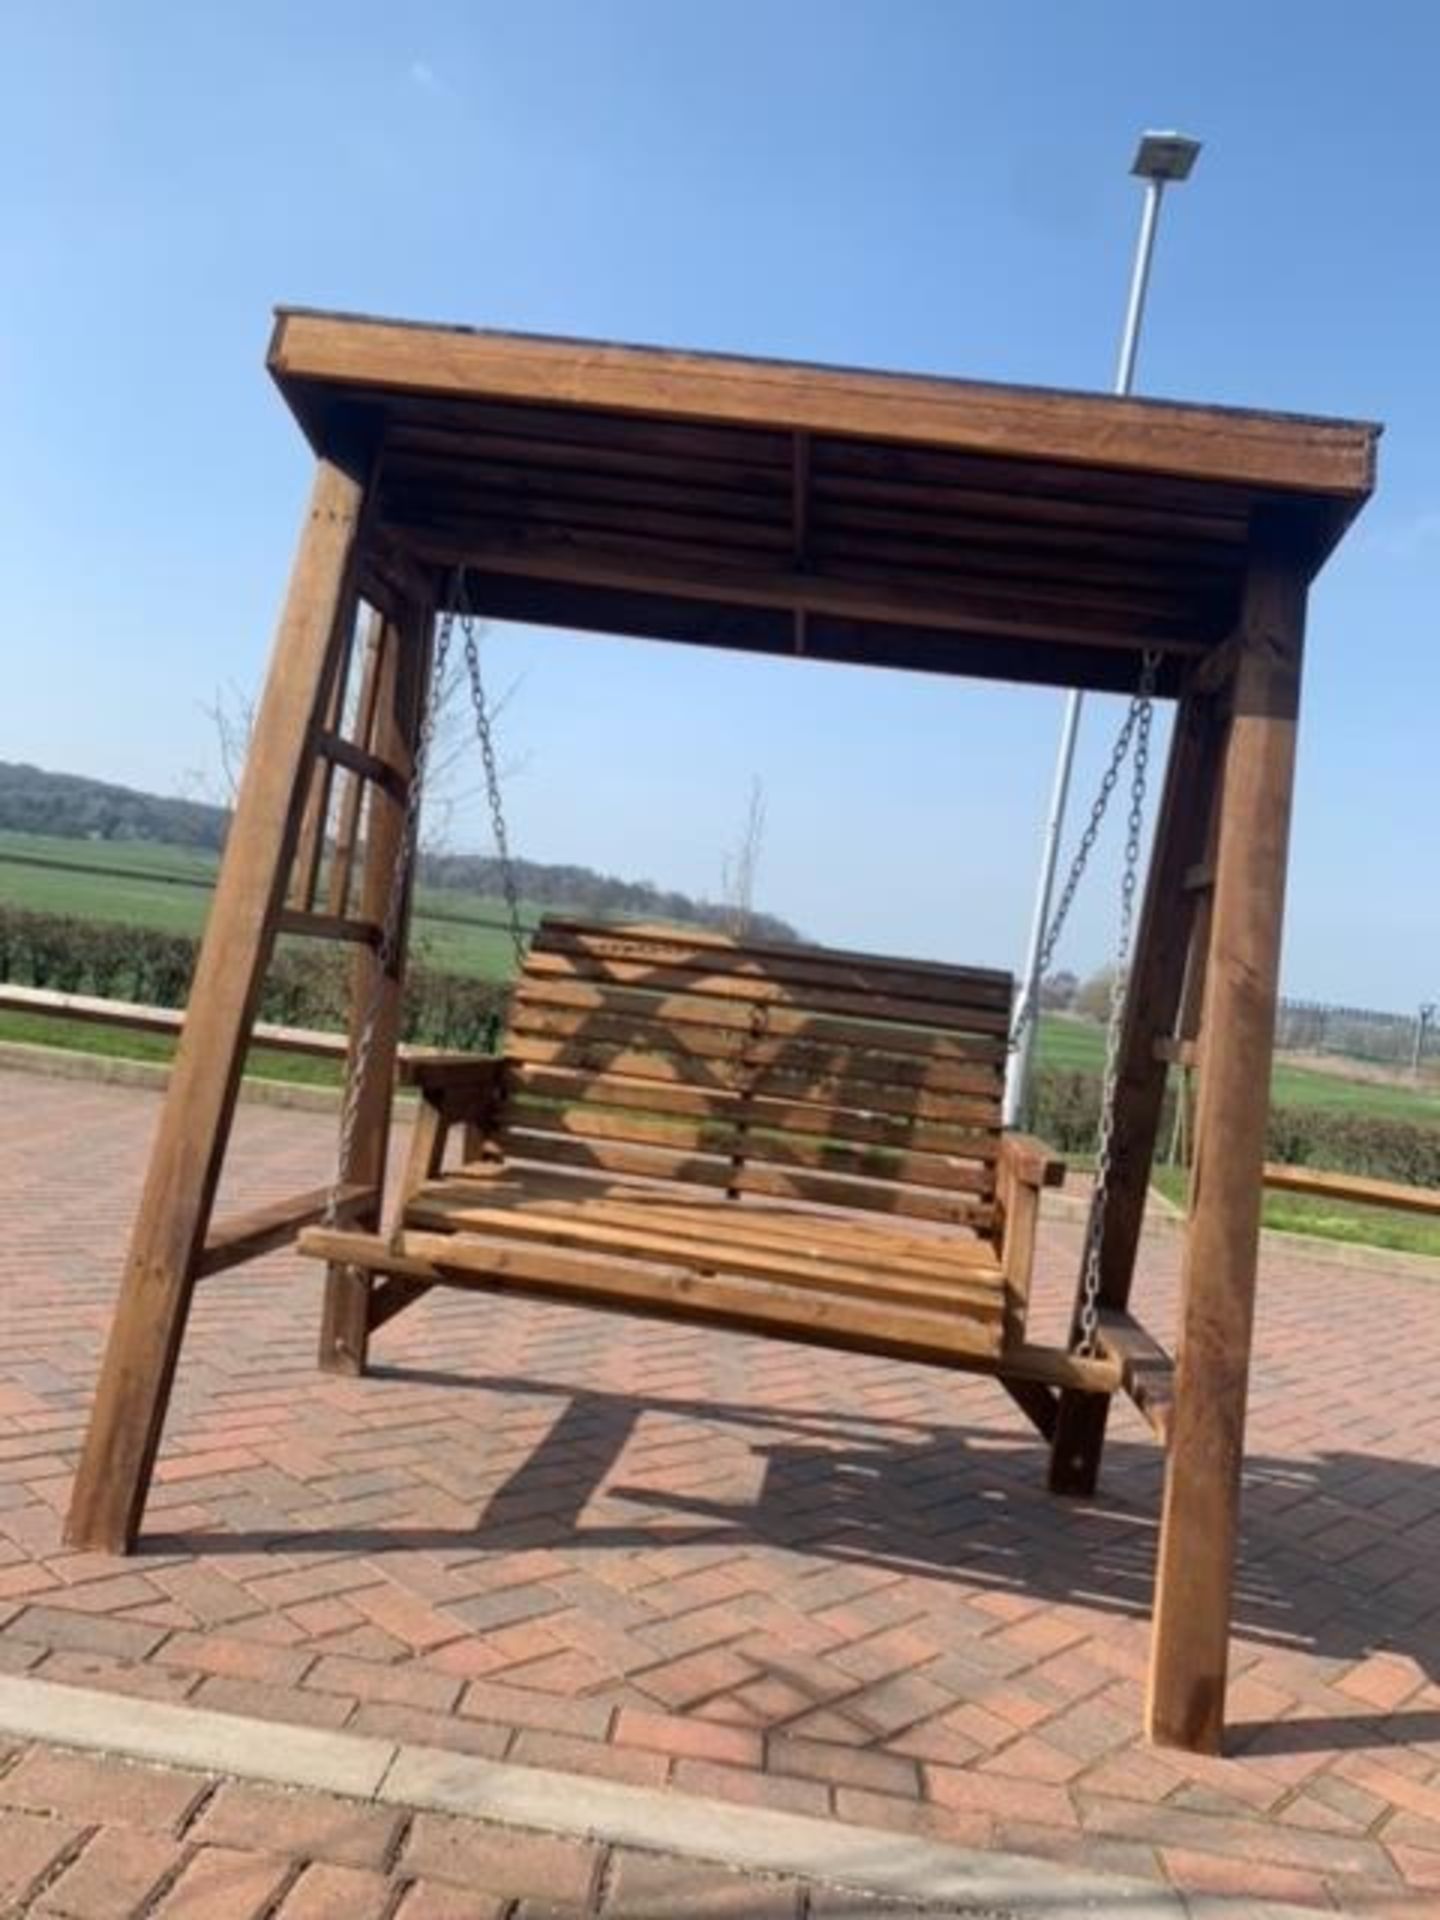 RW - BRAND NEW QUALITY Swing bench Handcrafted Garden Furniture. 2 Seater Swing bench *NO VAT* - Image 2 of 3